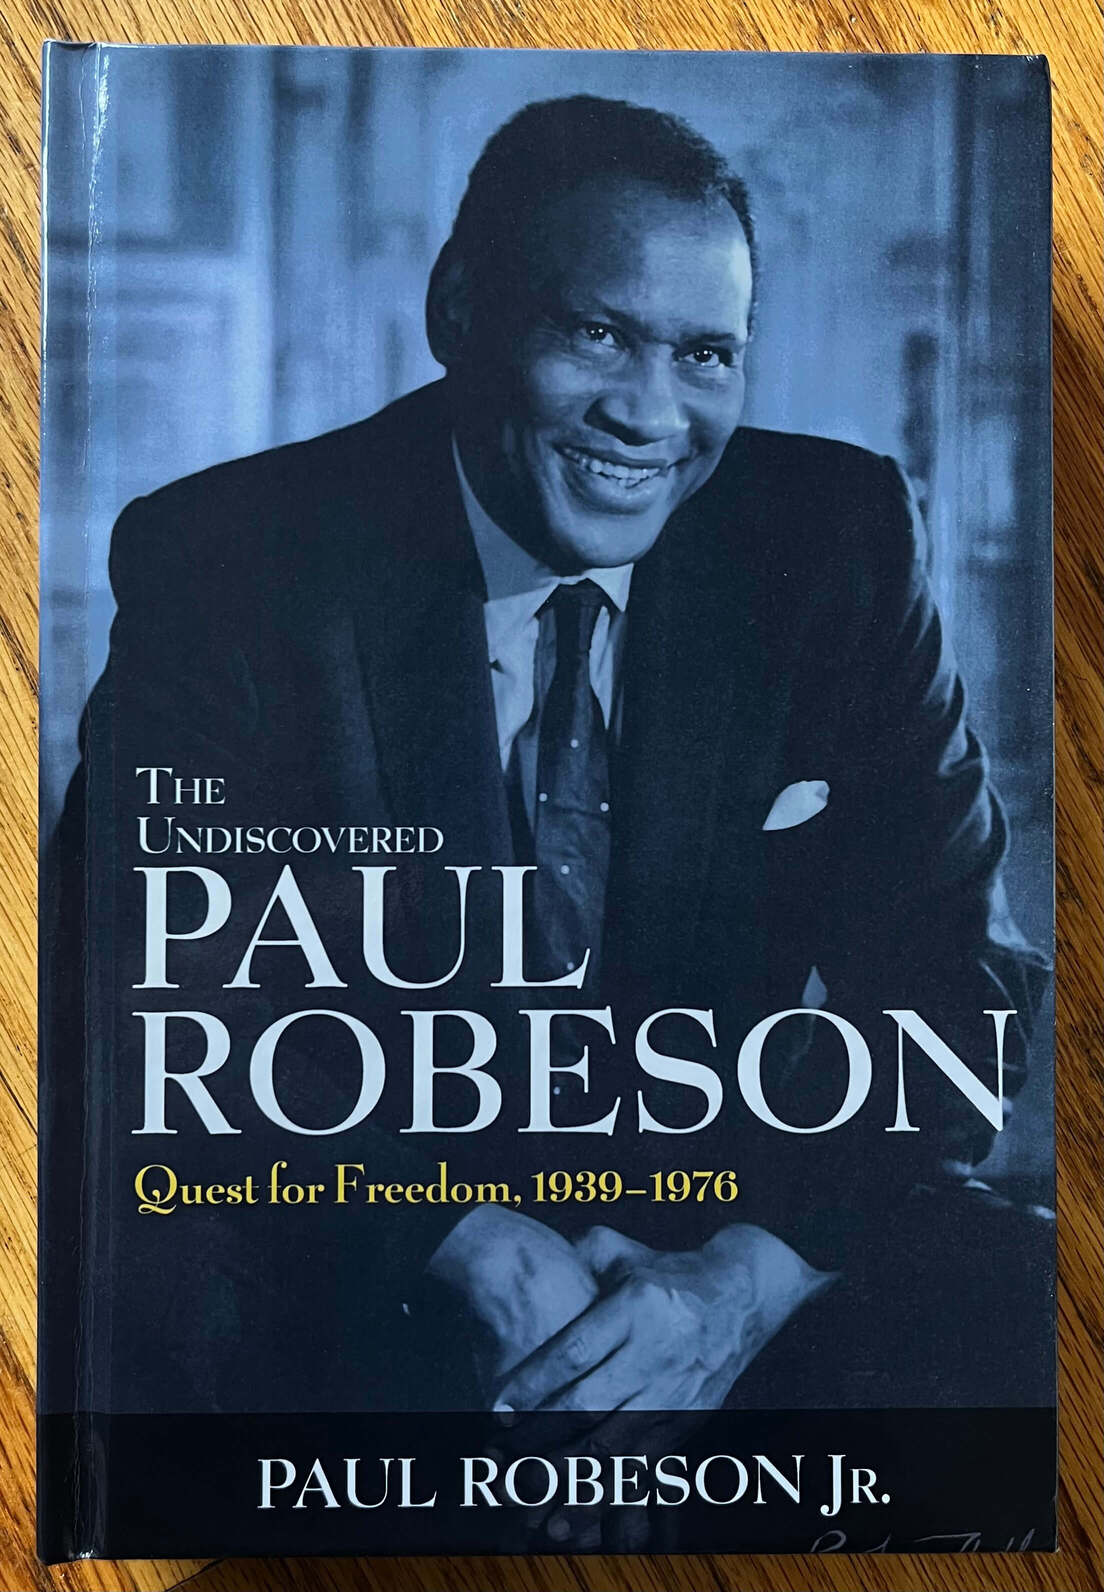 “The Undiscovered Paul Robeson: Quest for Freedom, 1939-1976” by Paul Robeson, Jr.